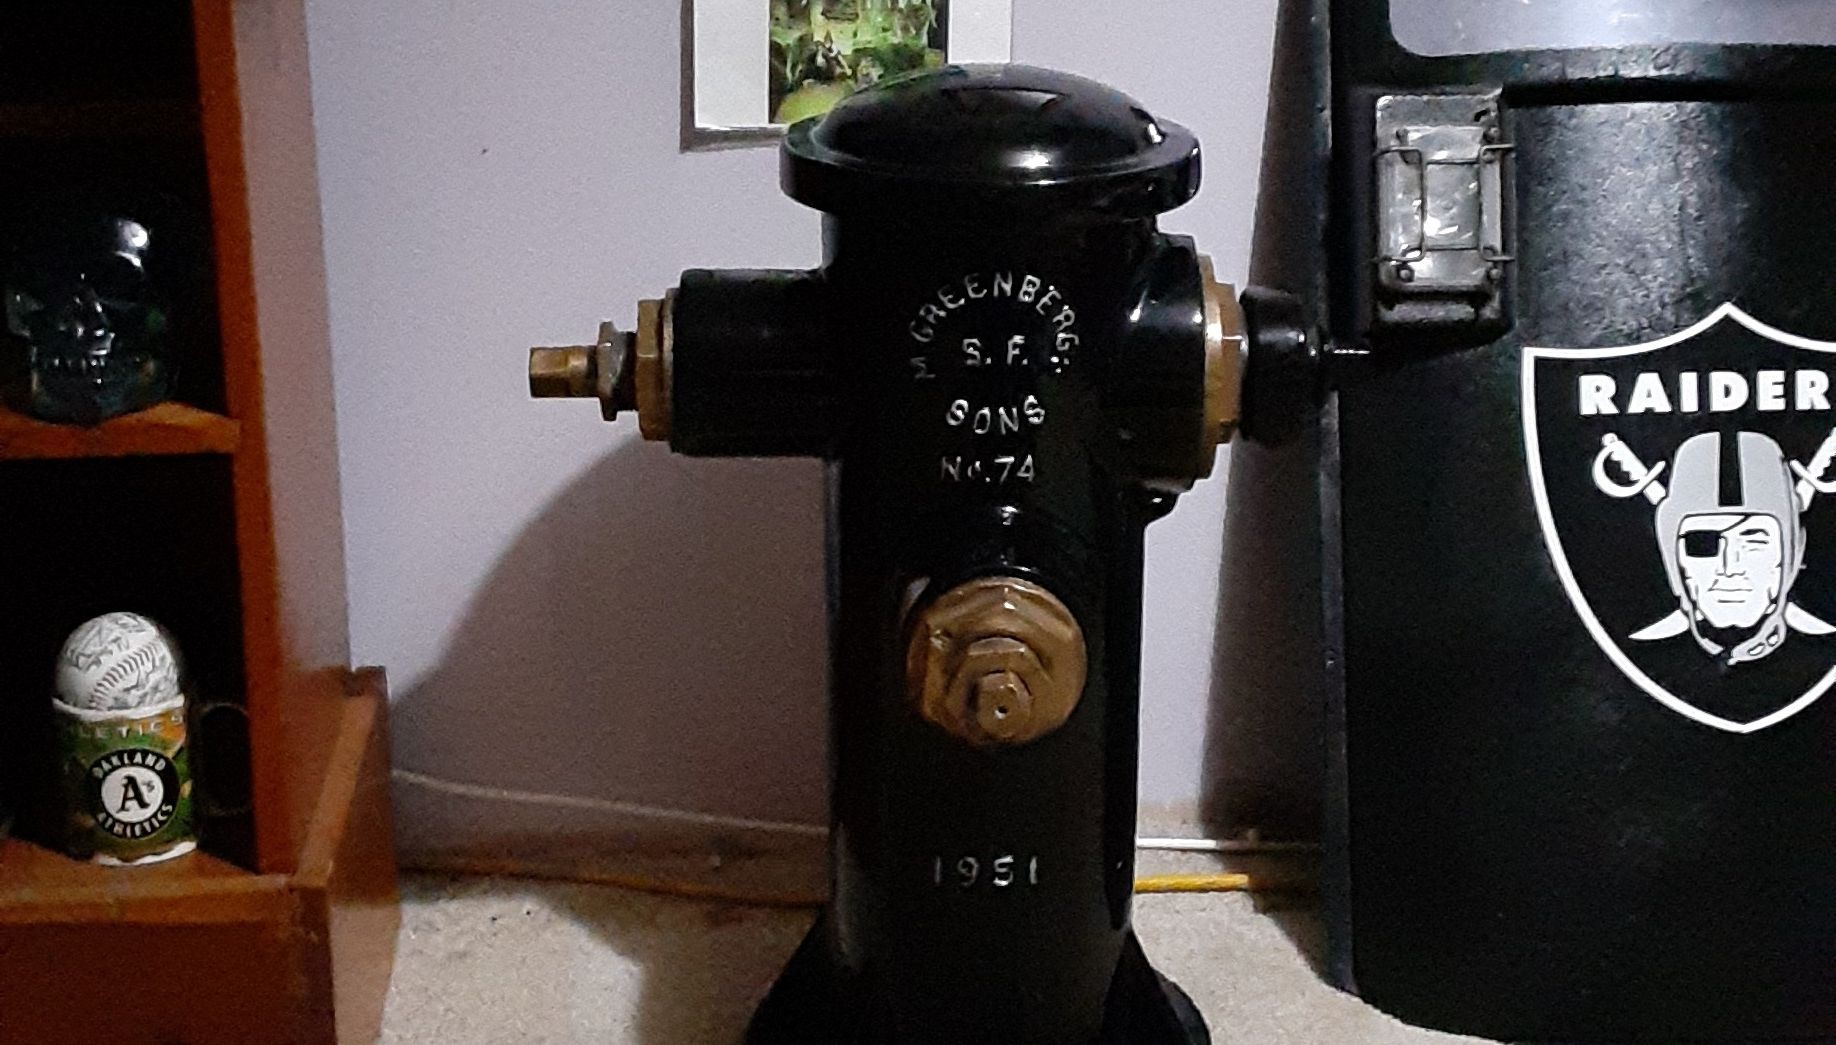 1951 real fire hydrant